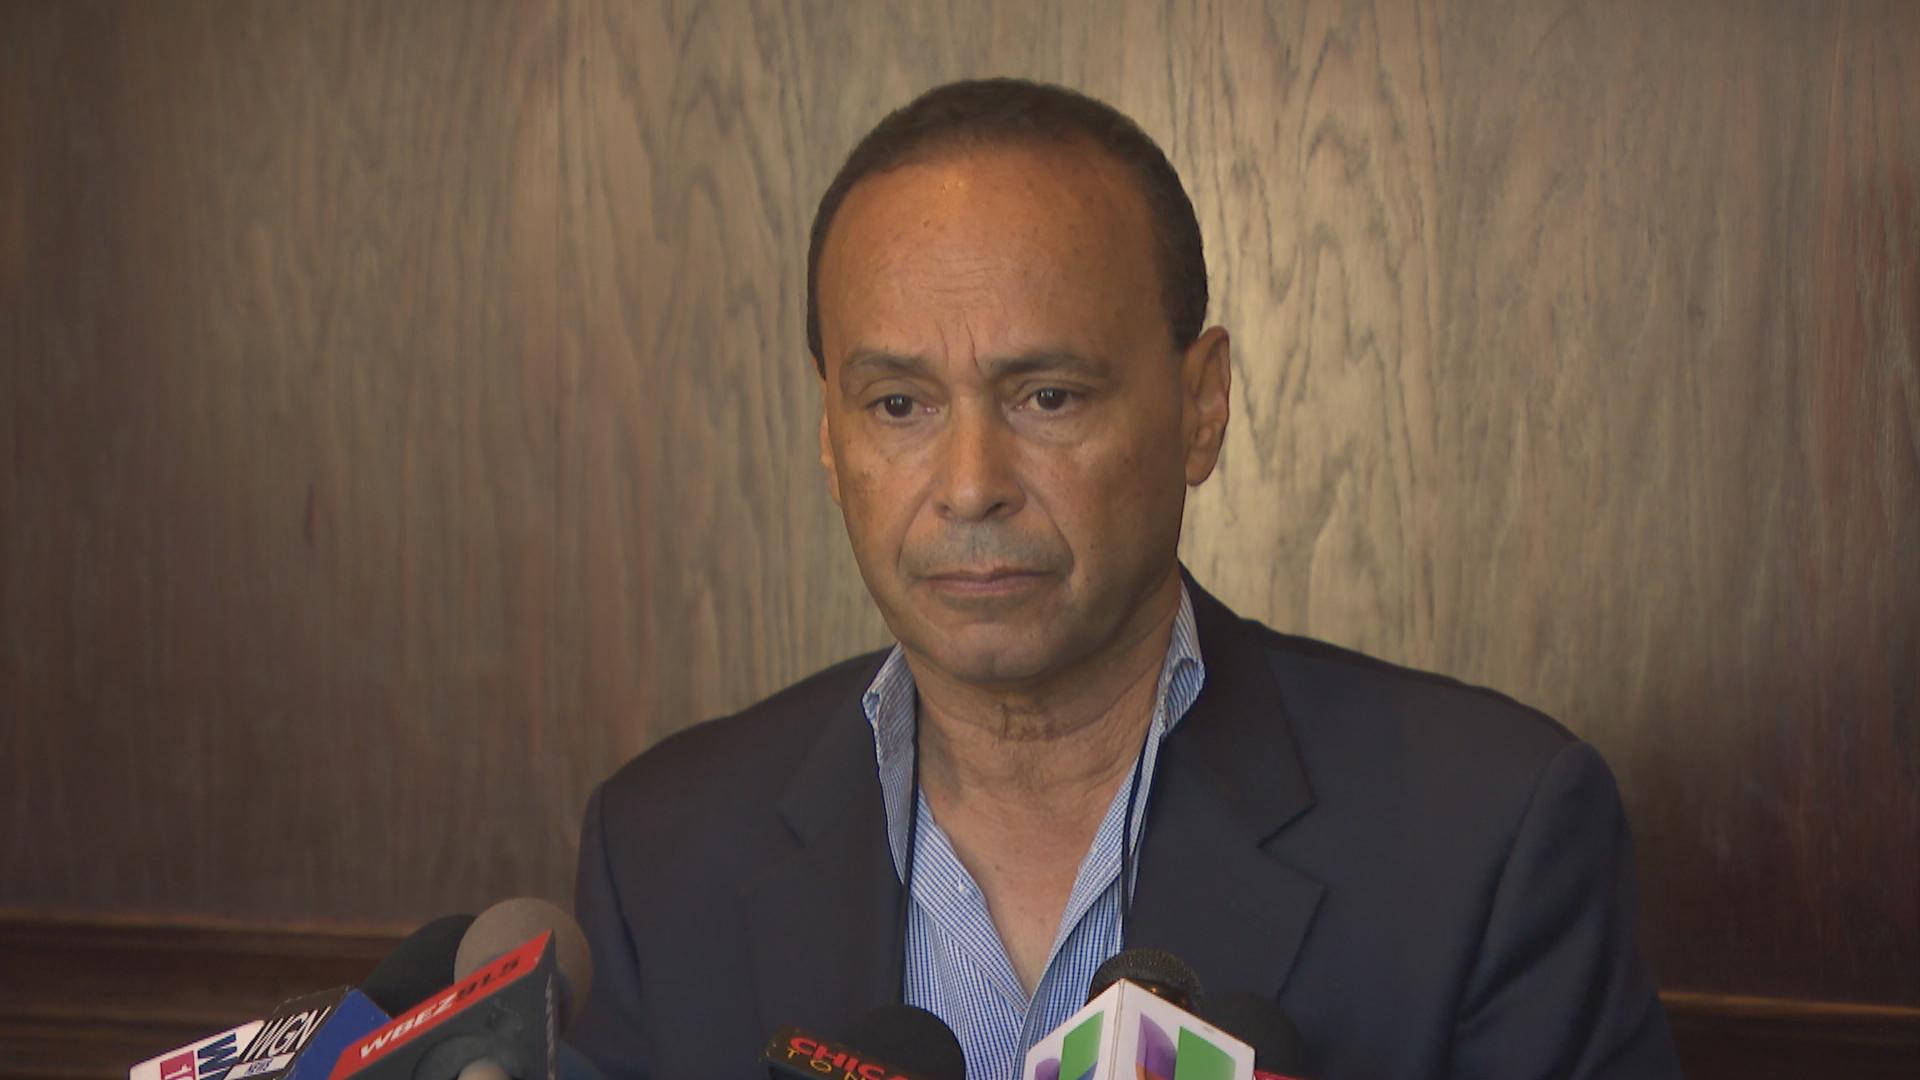 U.S. Rep. Luis Gutierrez announces Wednesday, Sept. 12, 2018 that he will not run for Chicago mayor. (Chicago Tonight)